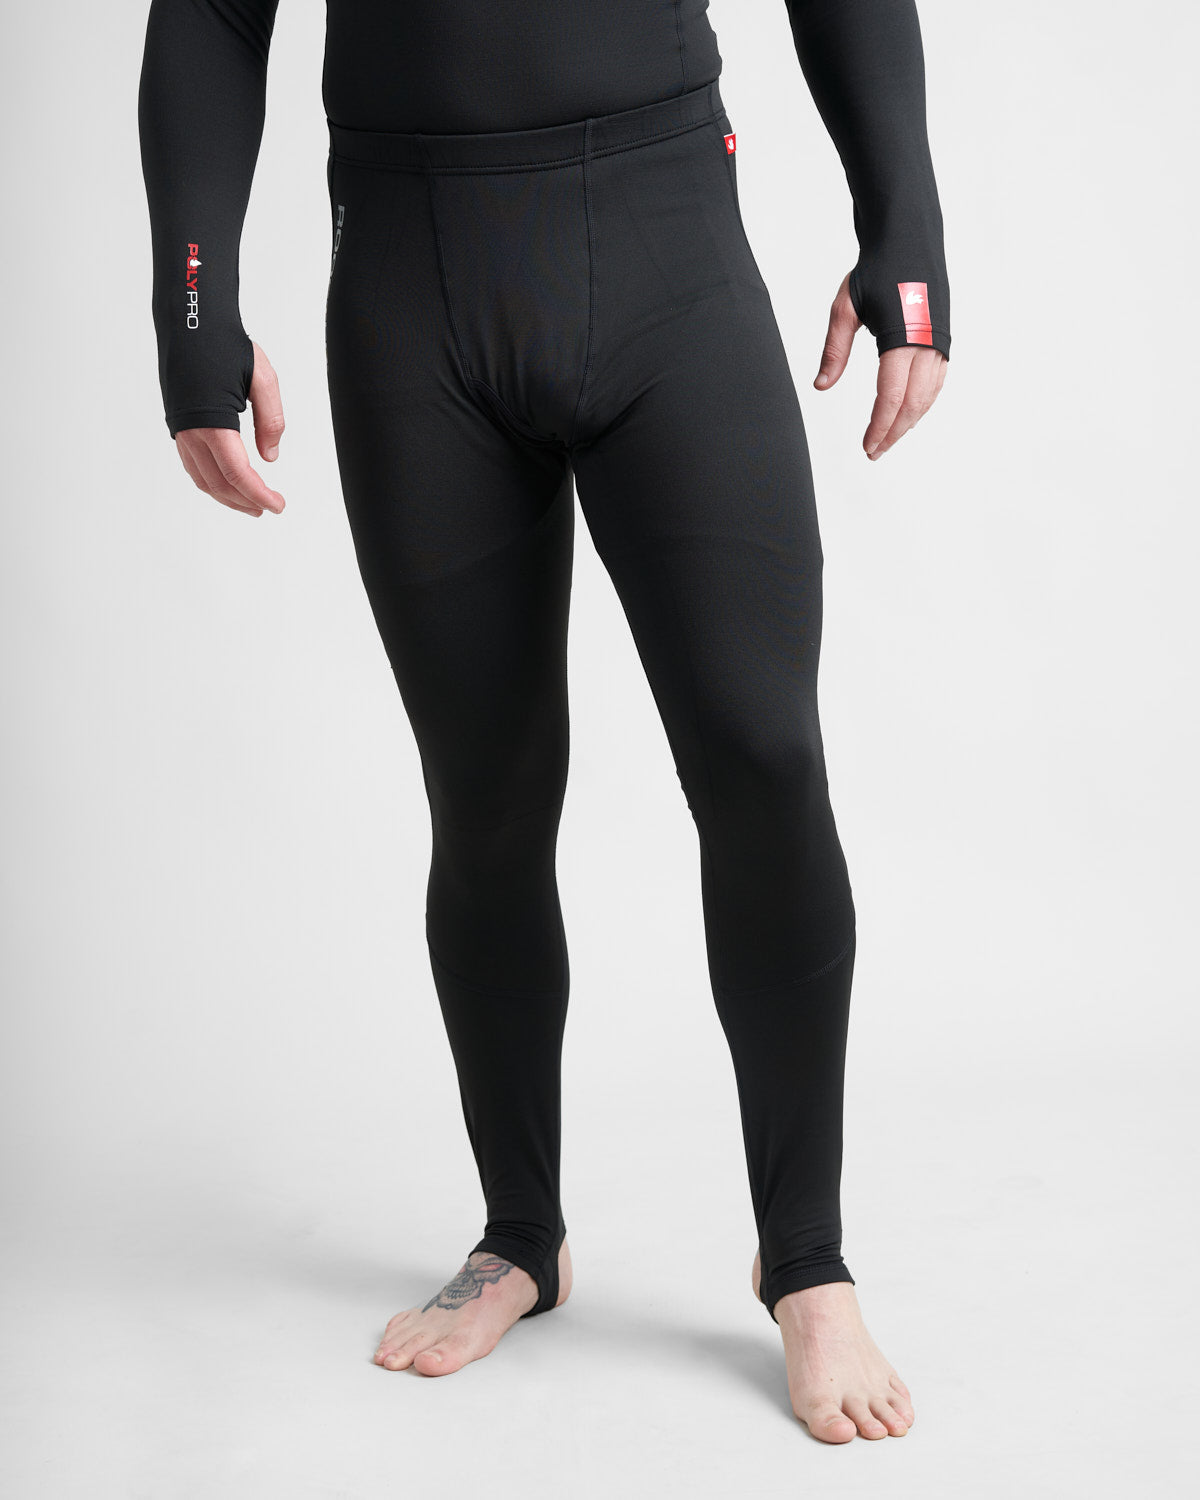 Skins K-Prop Ultimate X-Fit Long Tights - Mens Base Layer